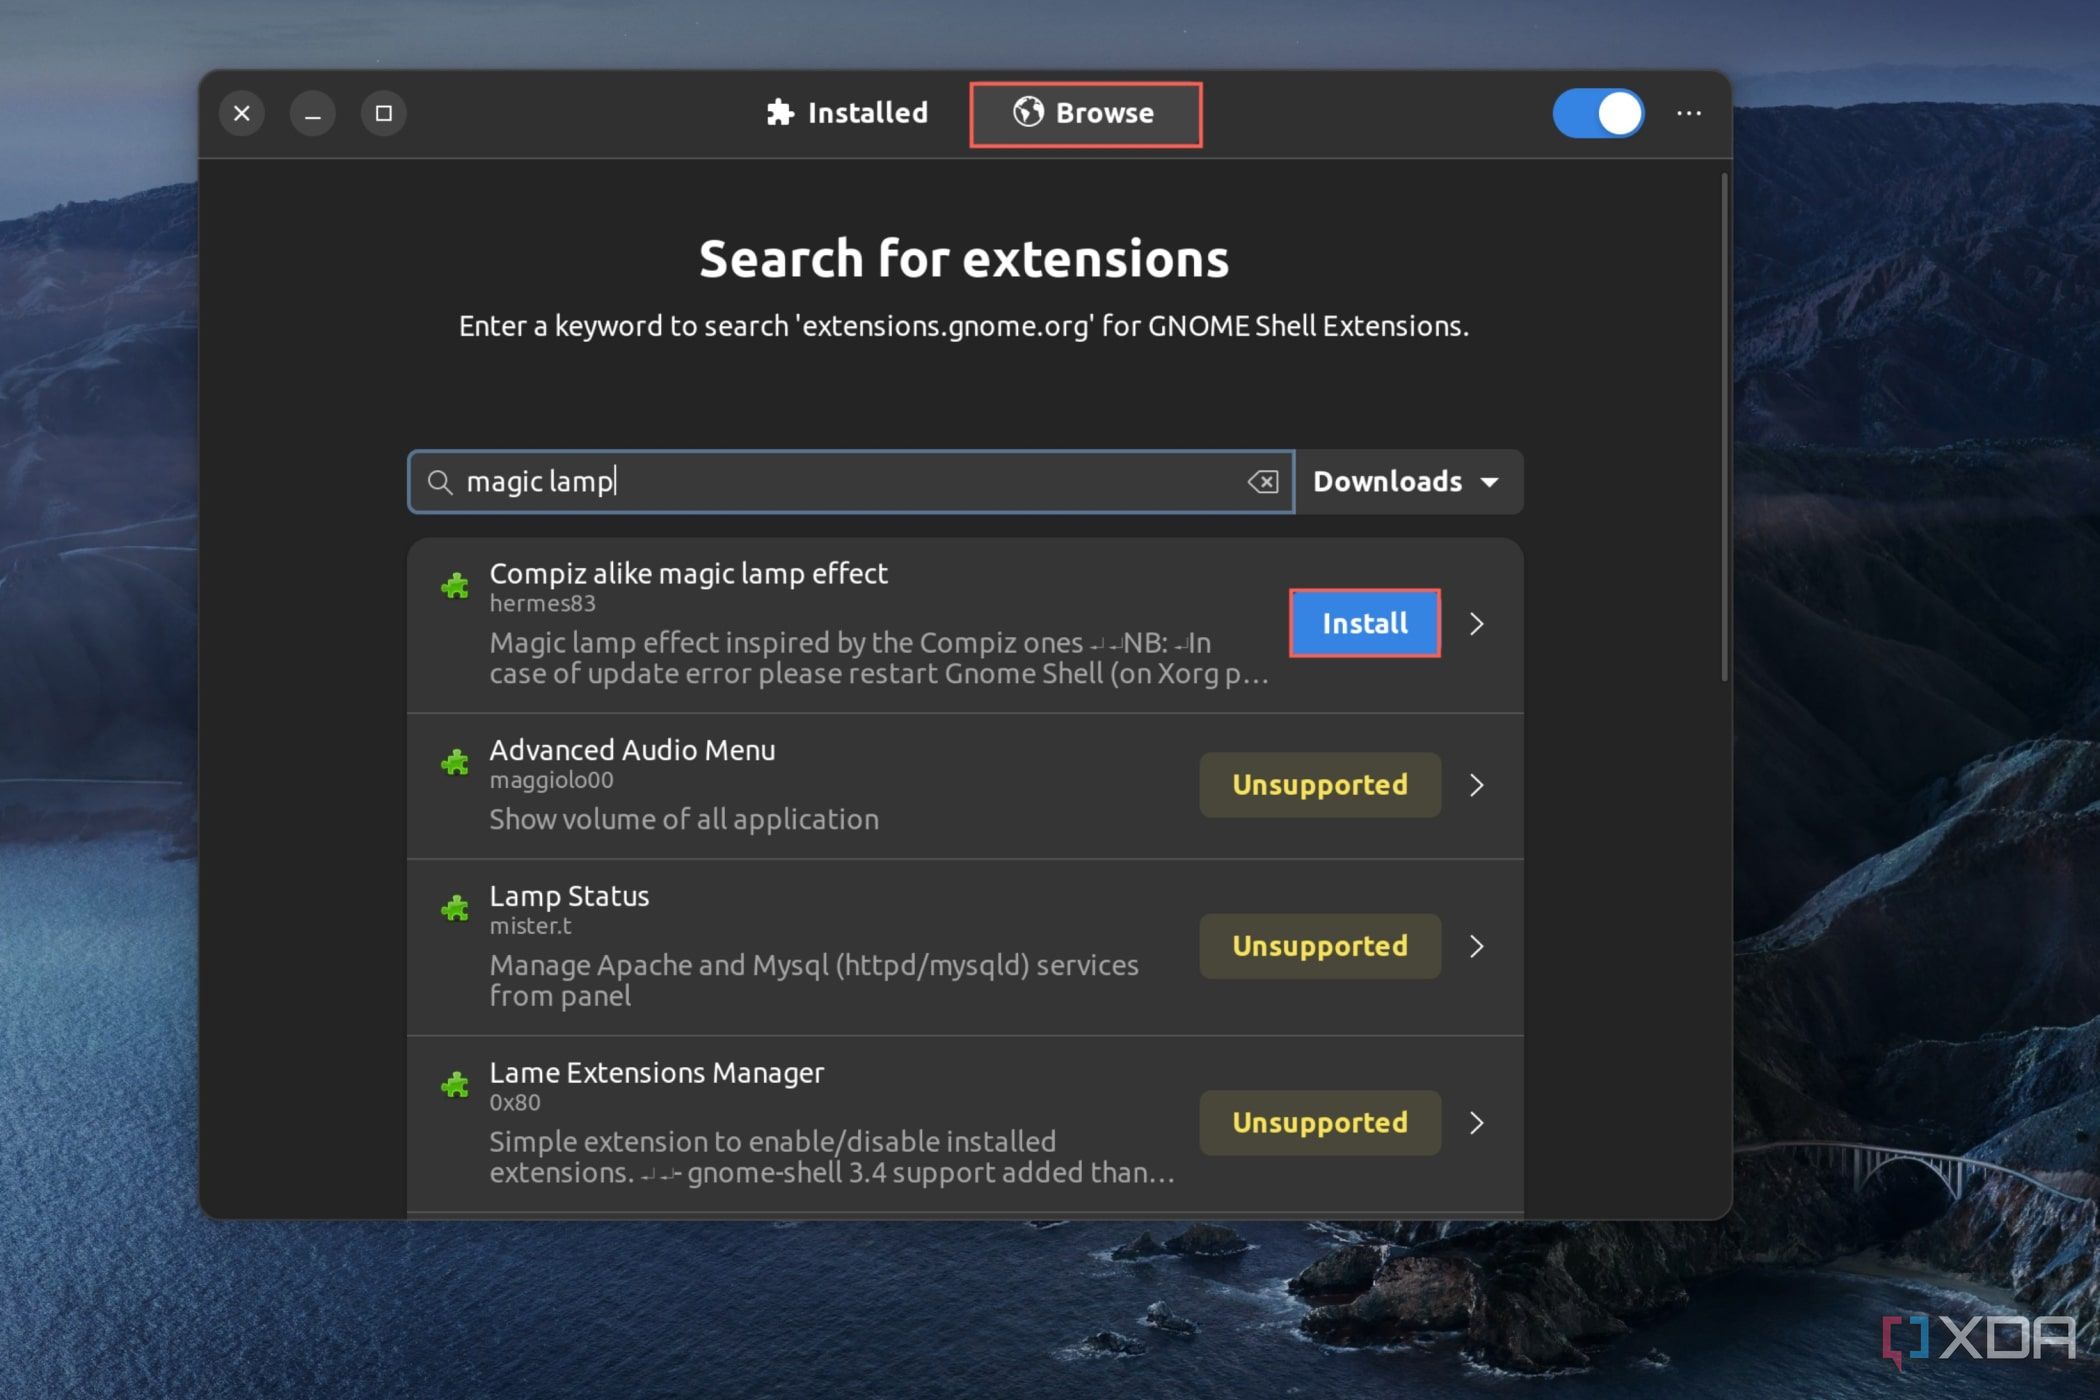 A screenshot of the Linux Extension Manager with the Compiz alike magic lamp effect extension highlighted